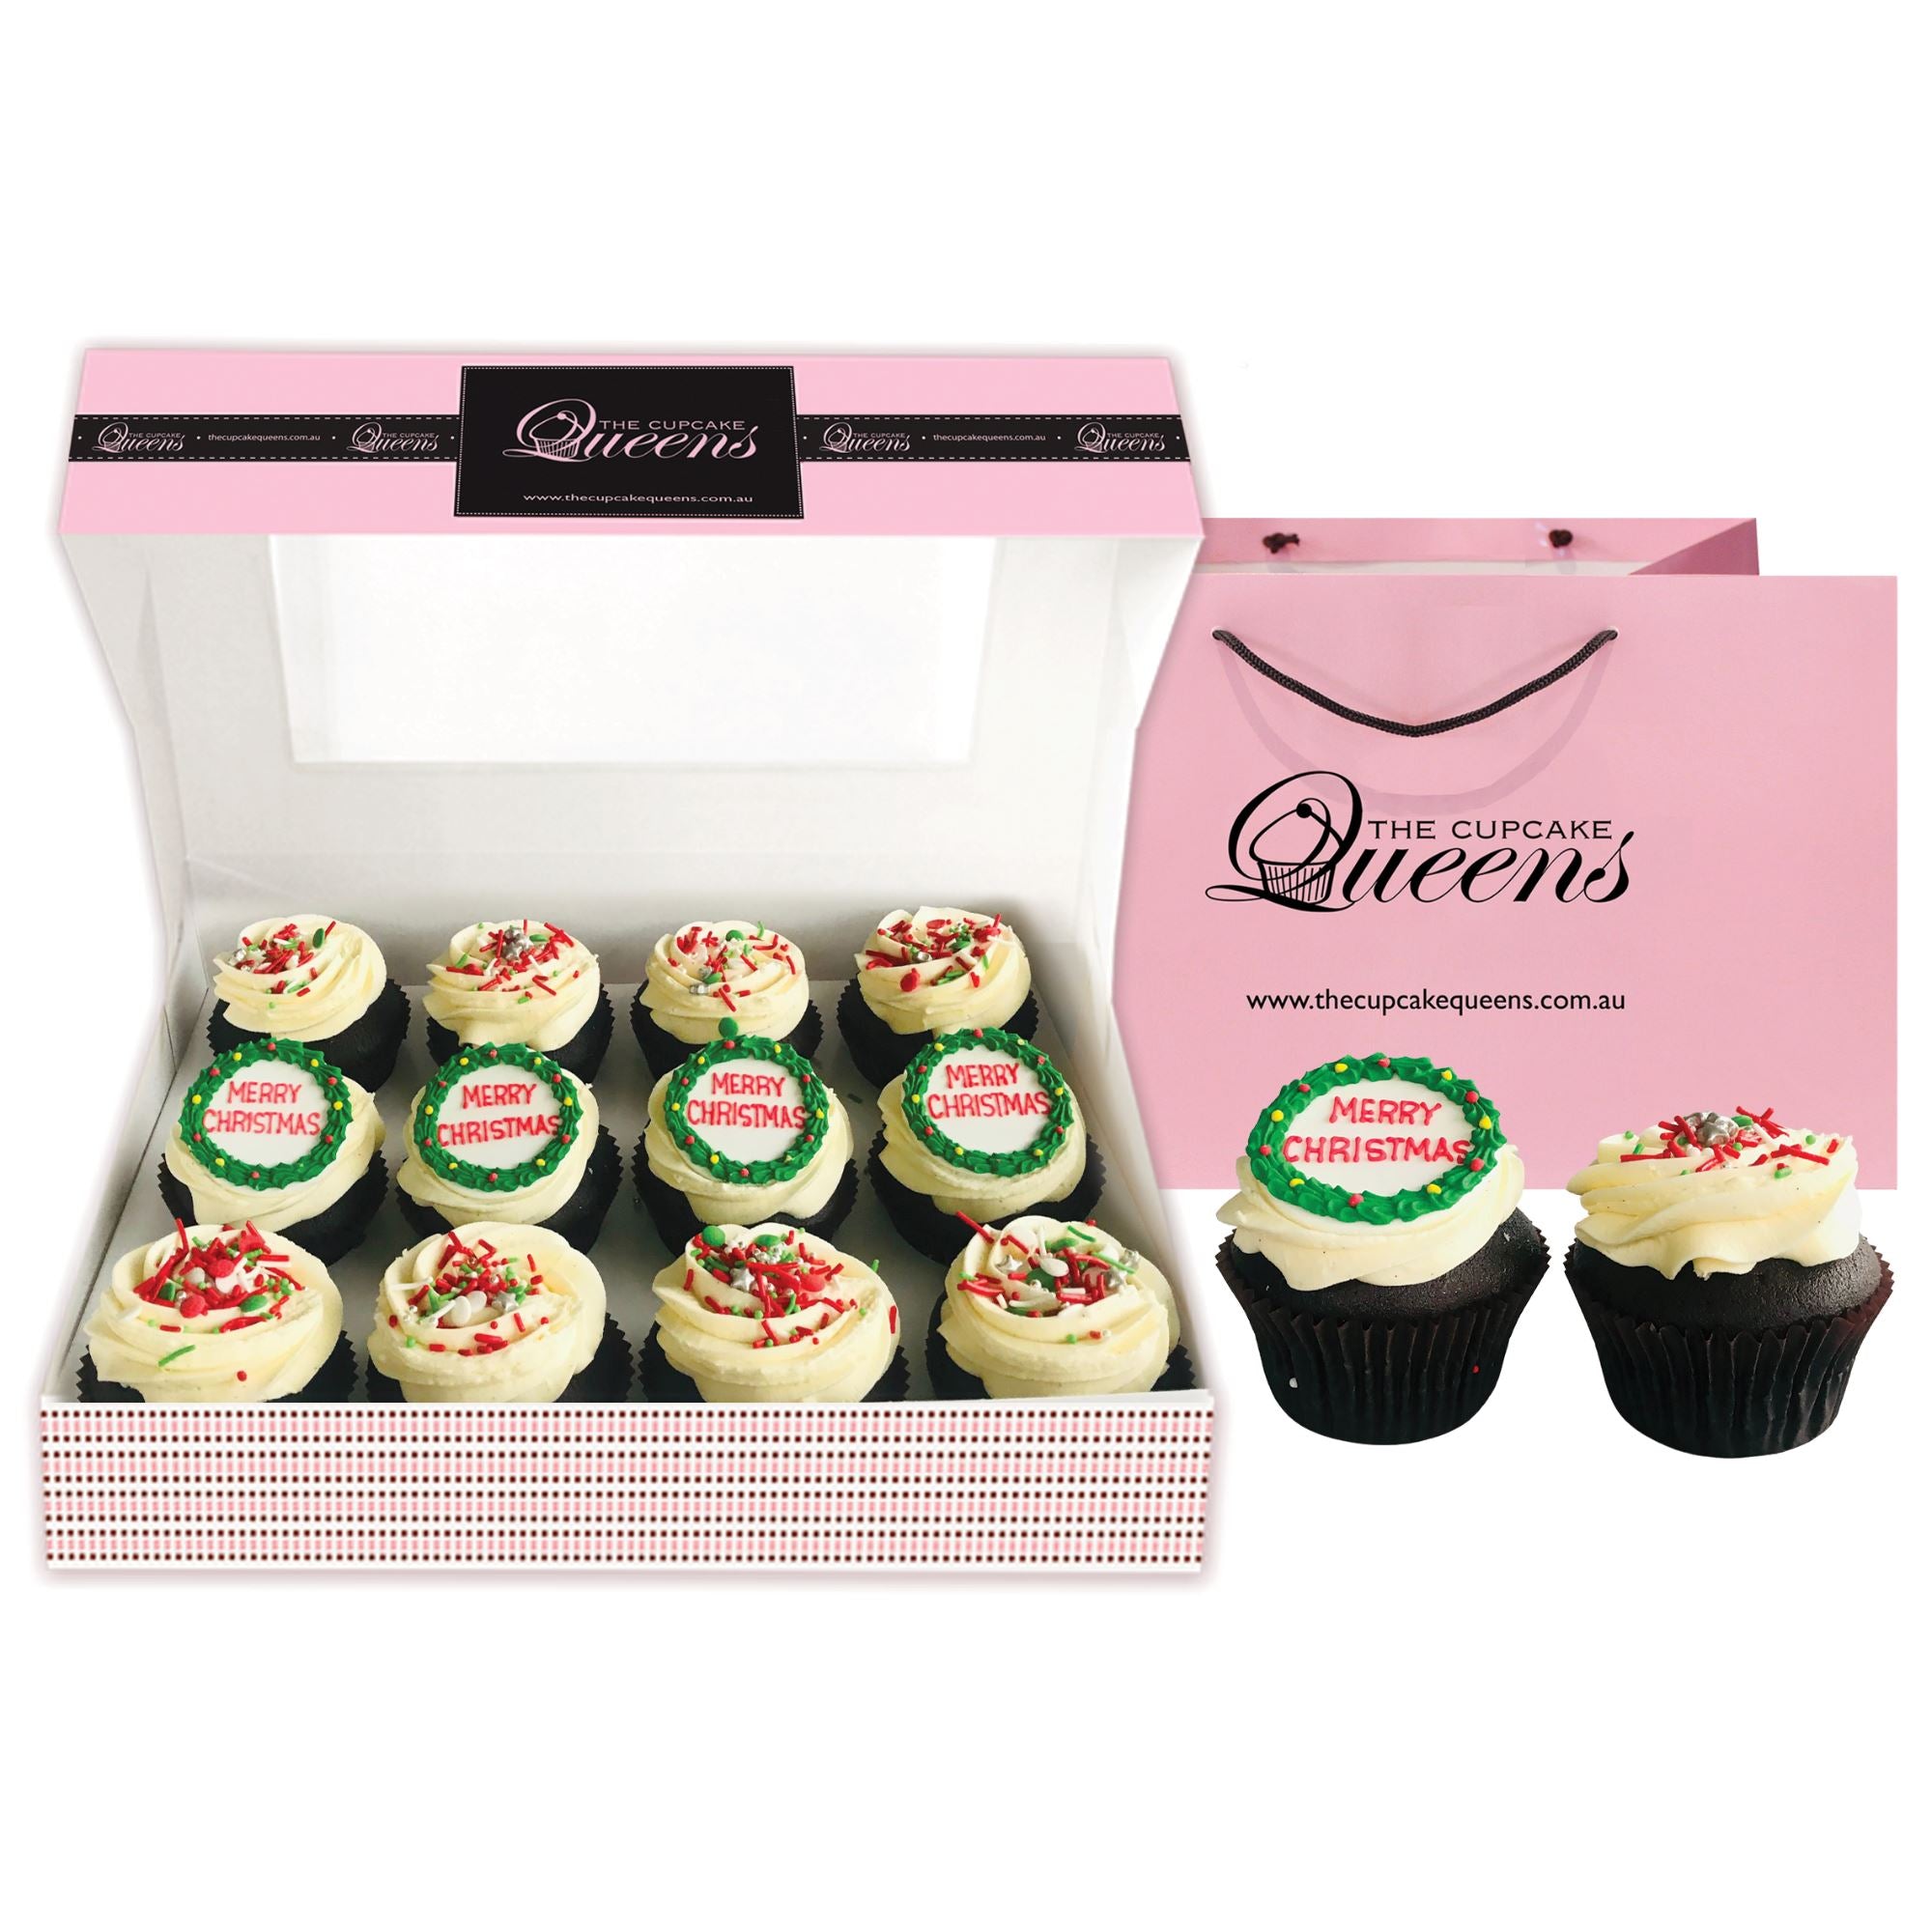 Christmas Gluten Friendly Regular Gift box Cupcakes Pre Selected Boxes The Cupcake Queens 